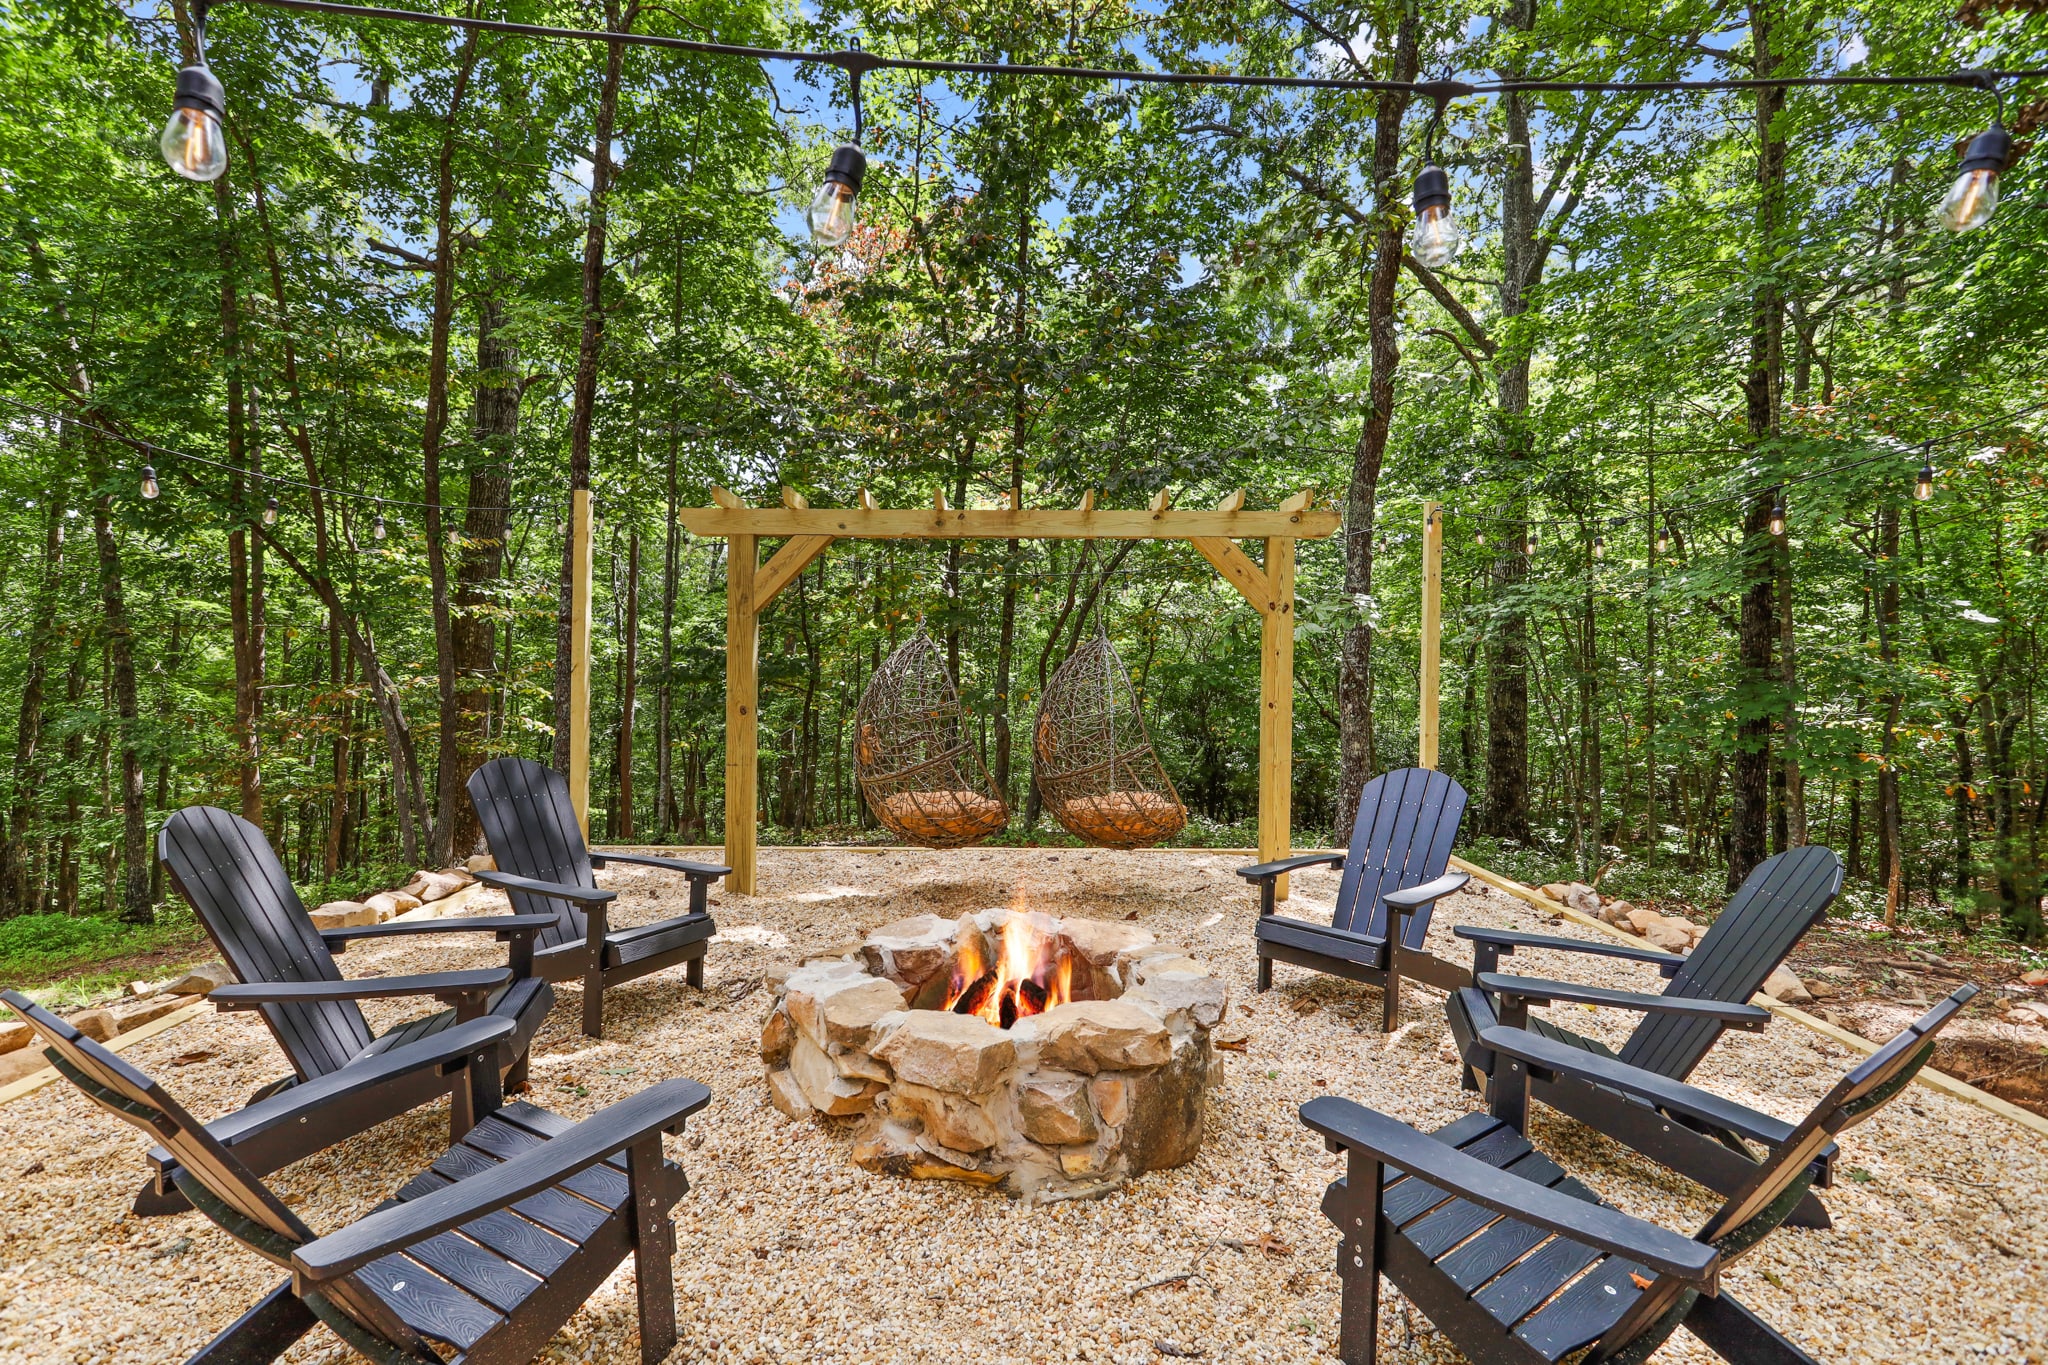 The coziest fire pit around!